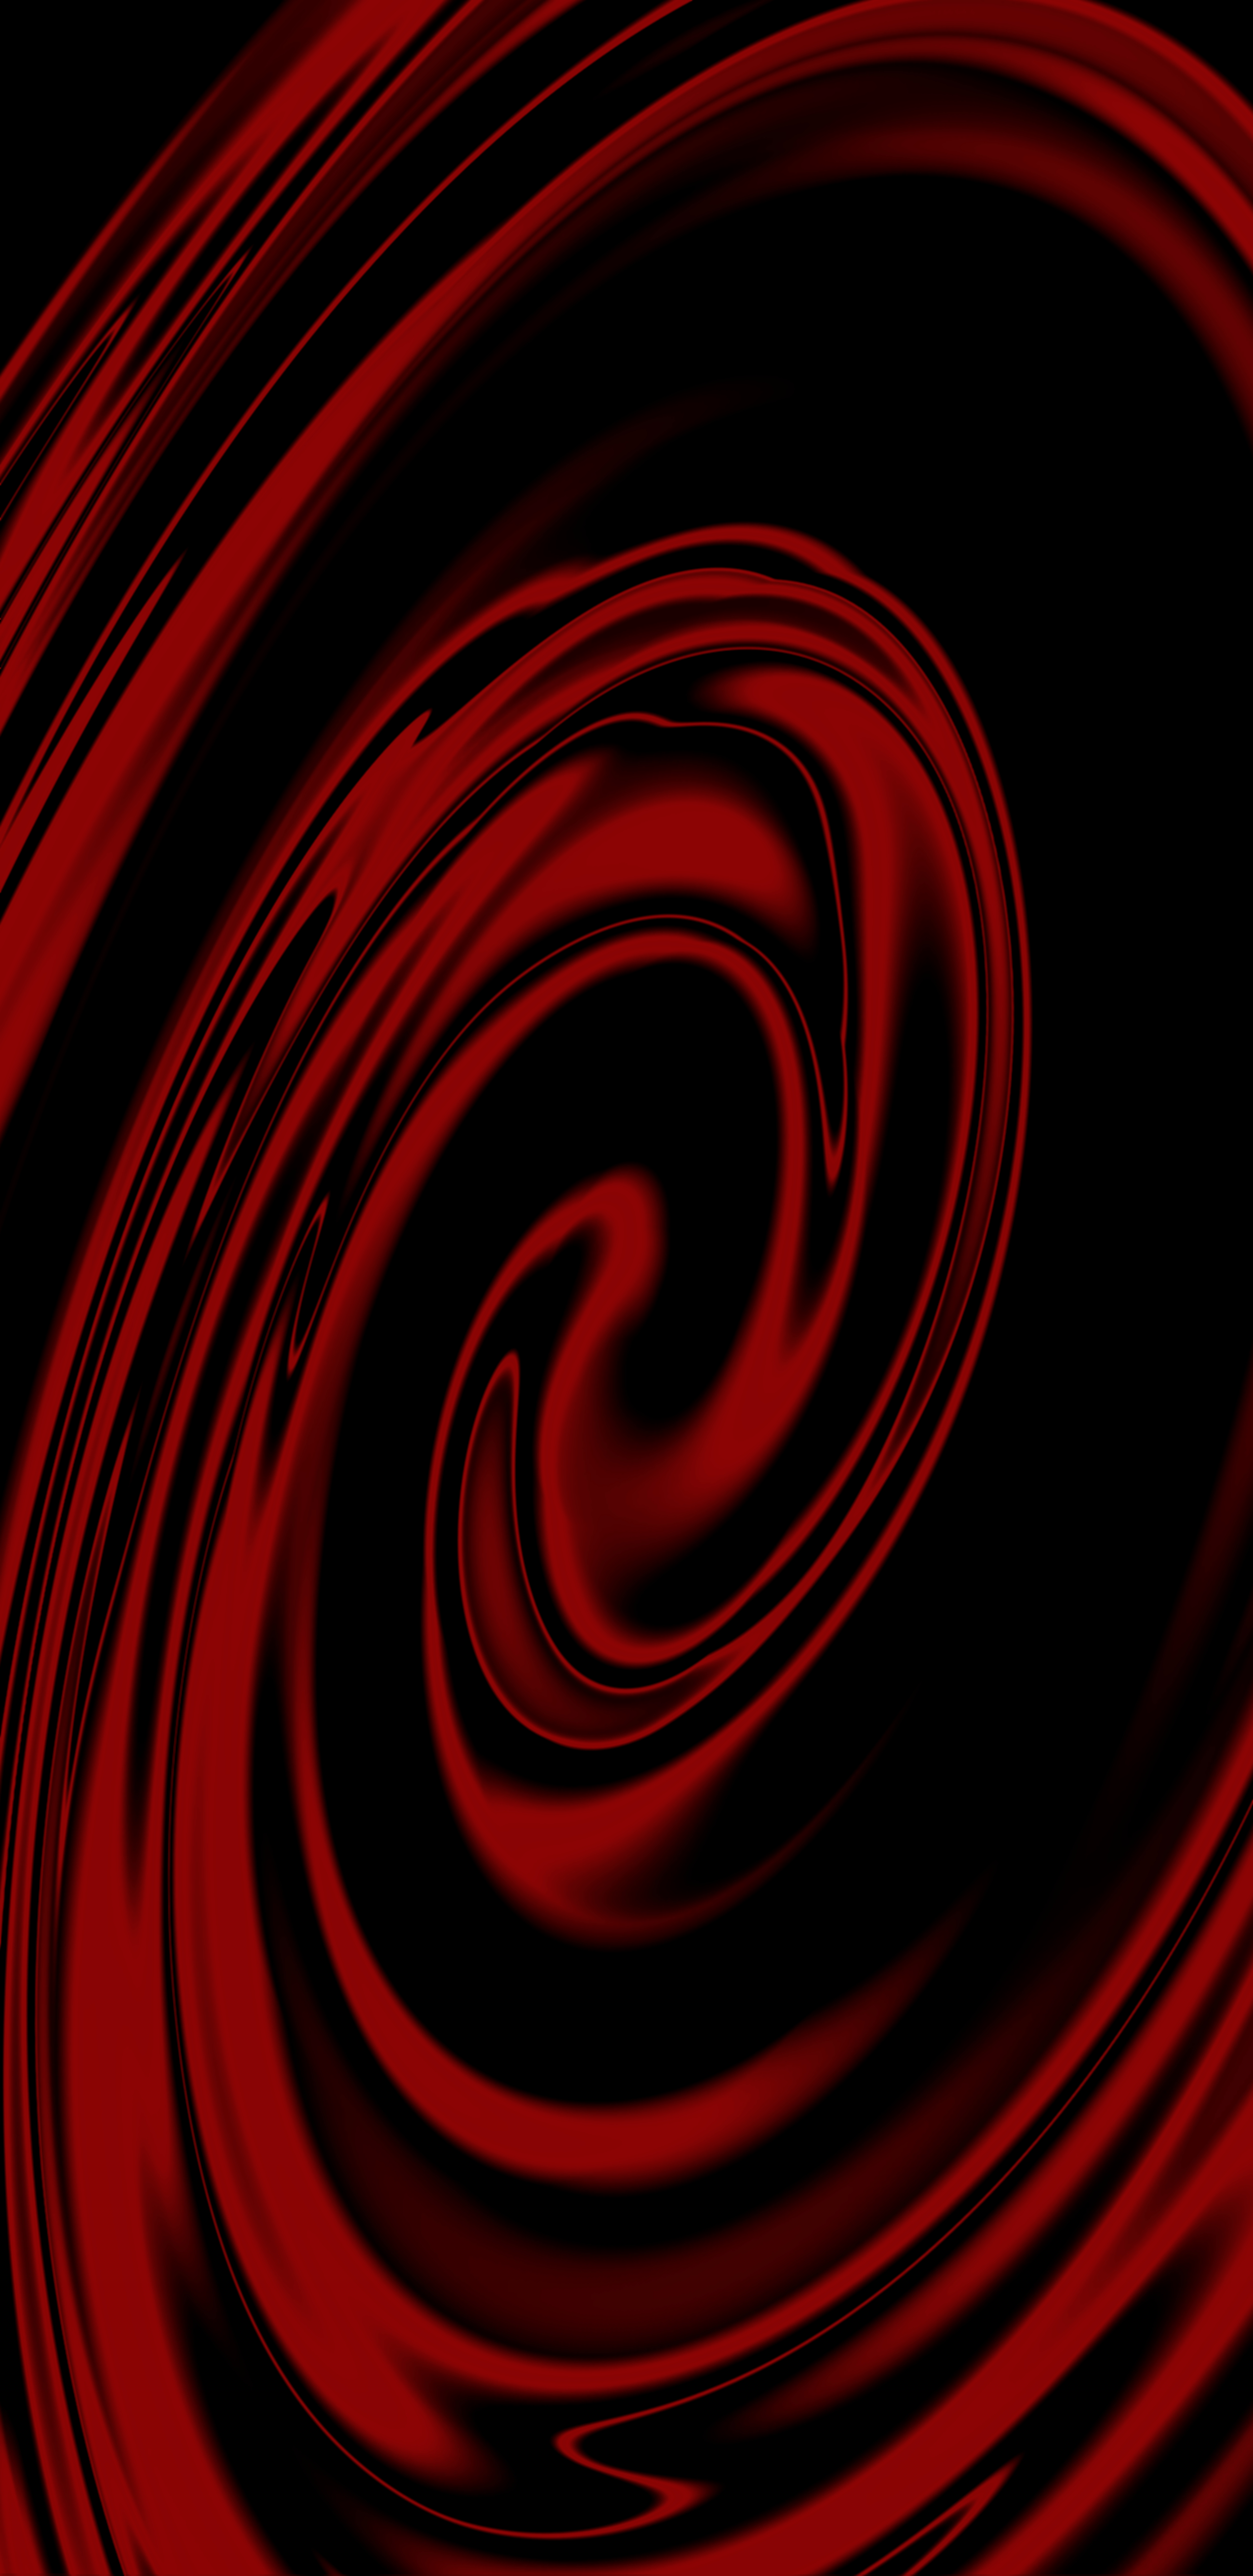 involute, abstract, black, red, spiral, swirling